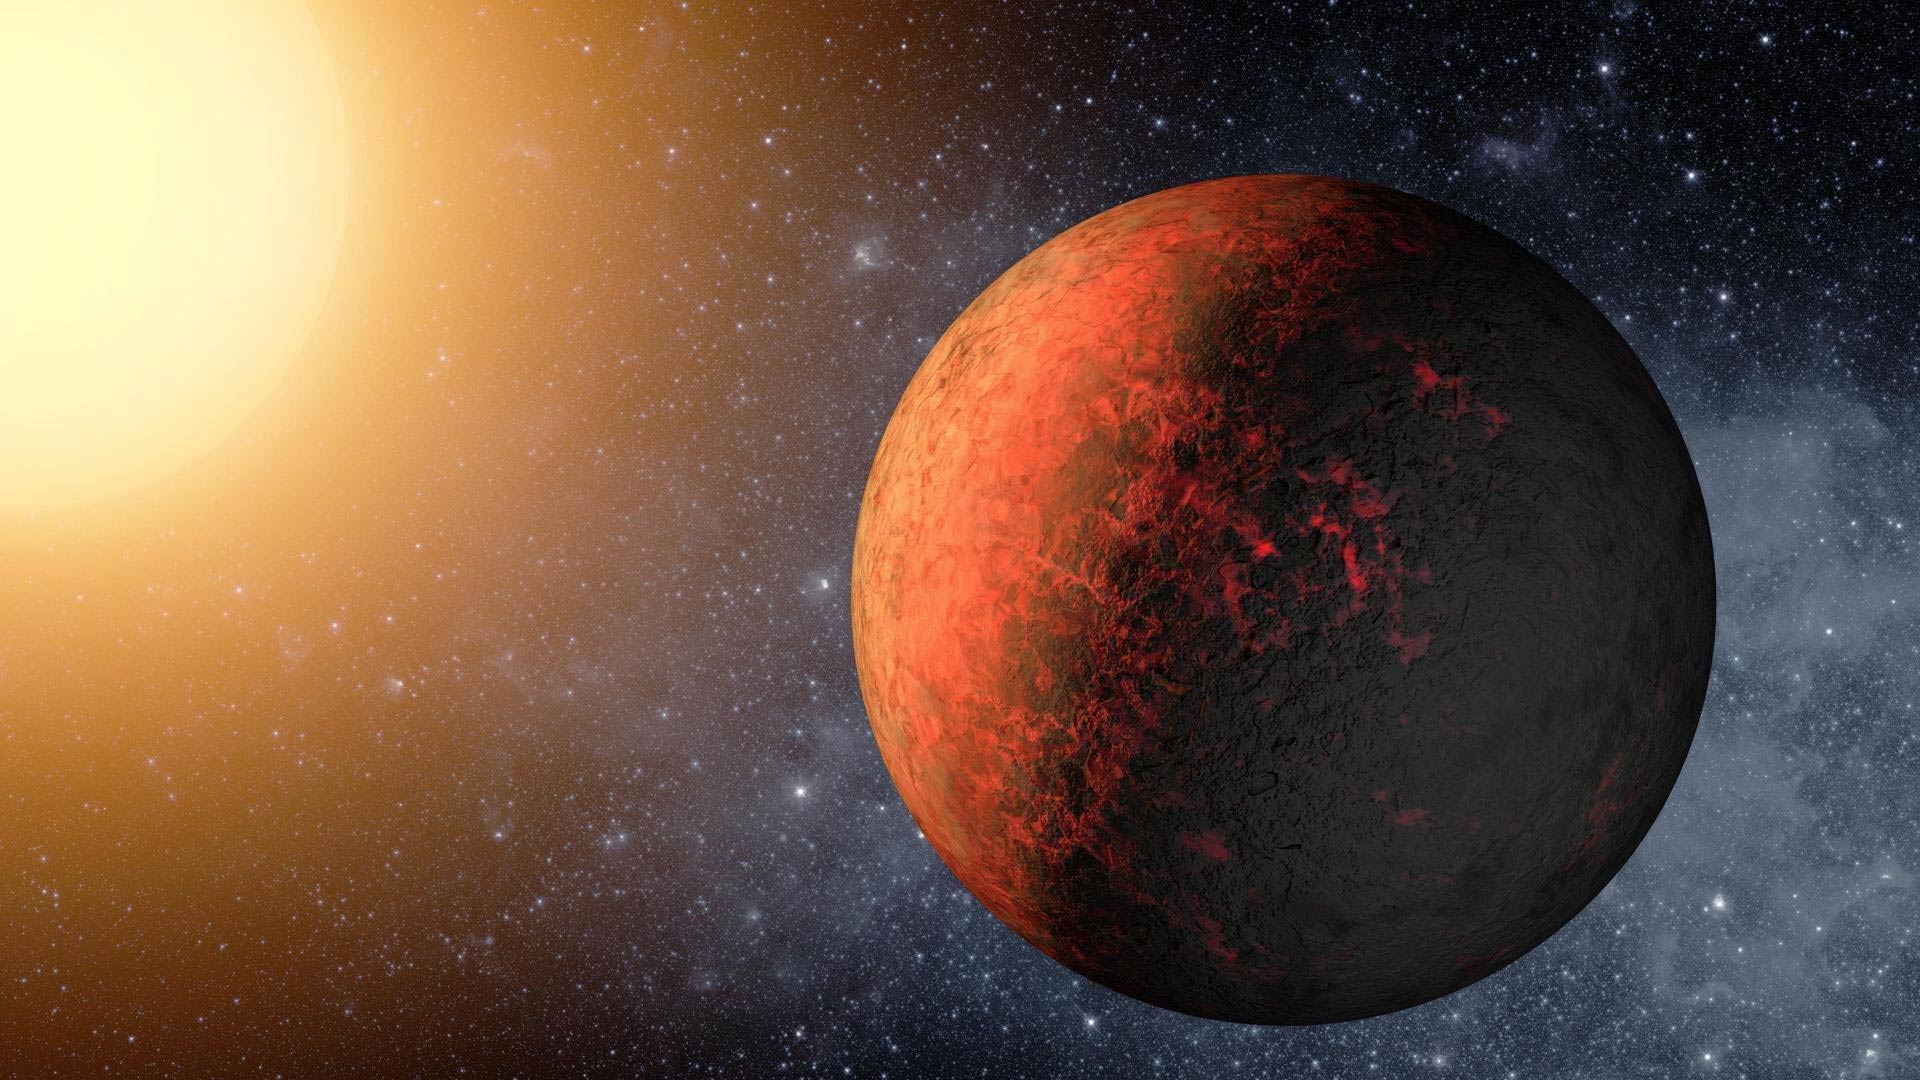 An artist's rendering of Kepler 38. The illustration features a mottled red planet lit by a bright light.